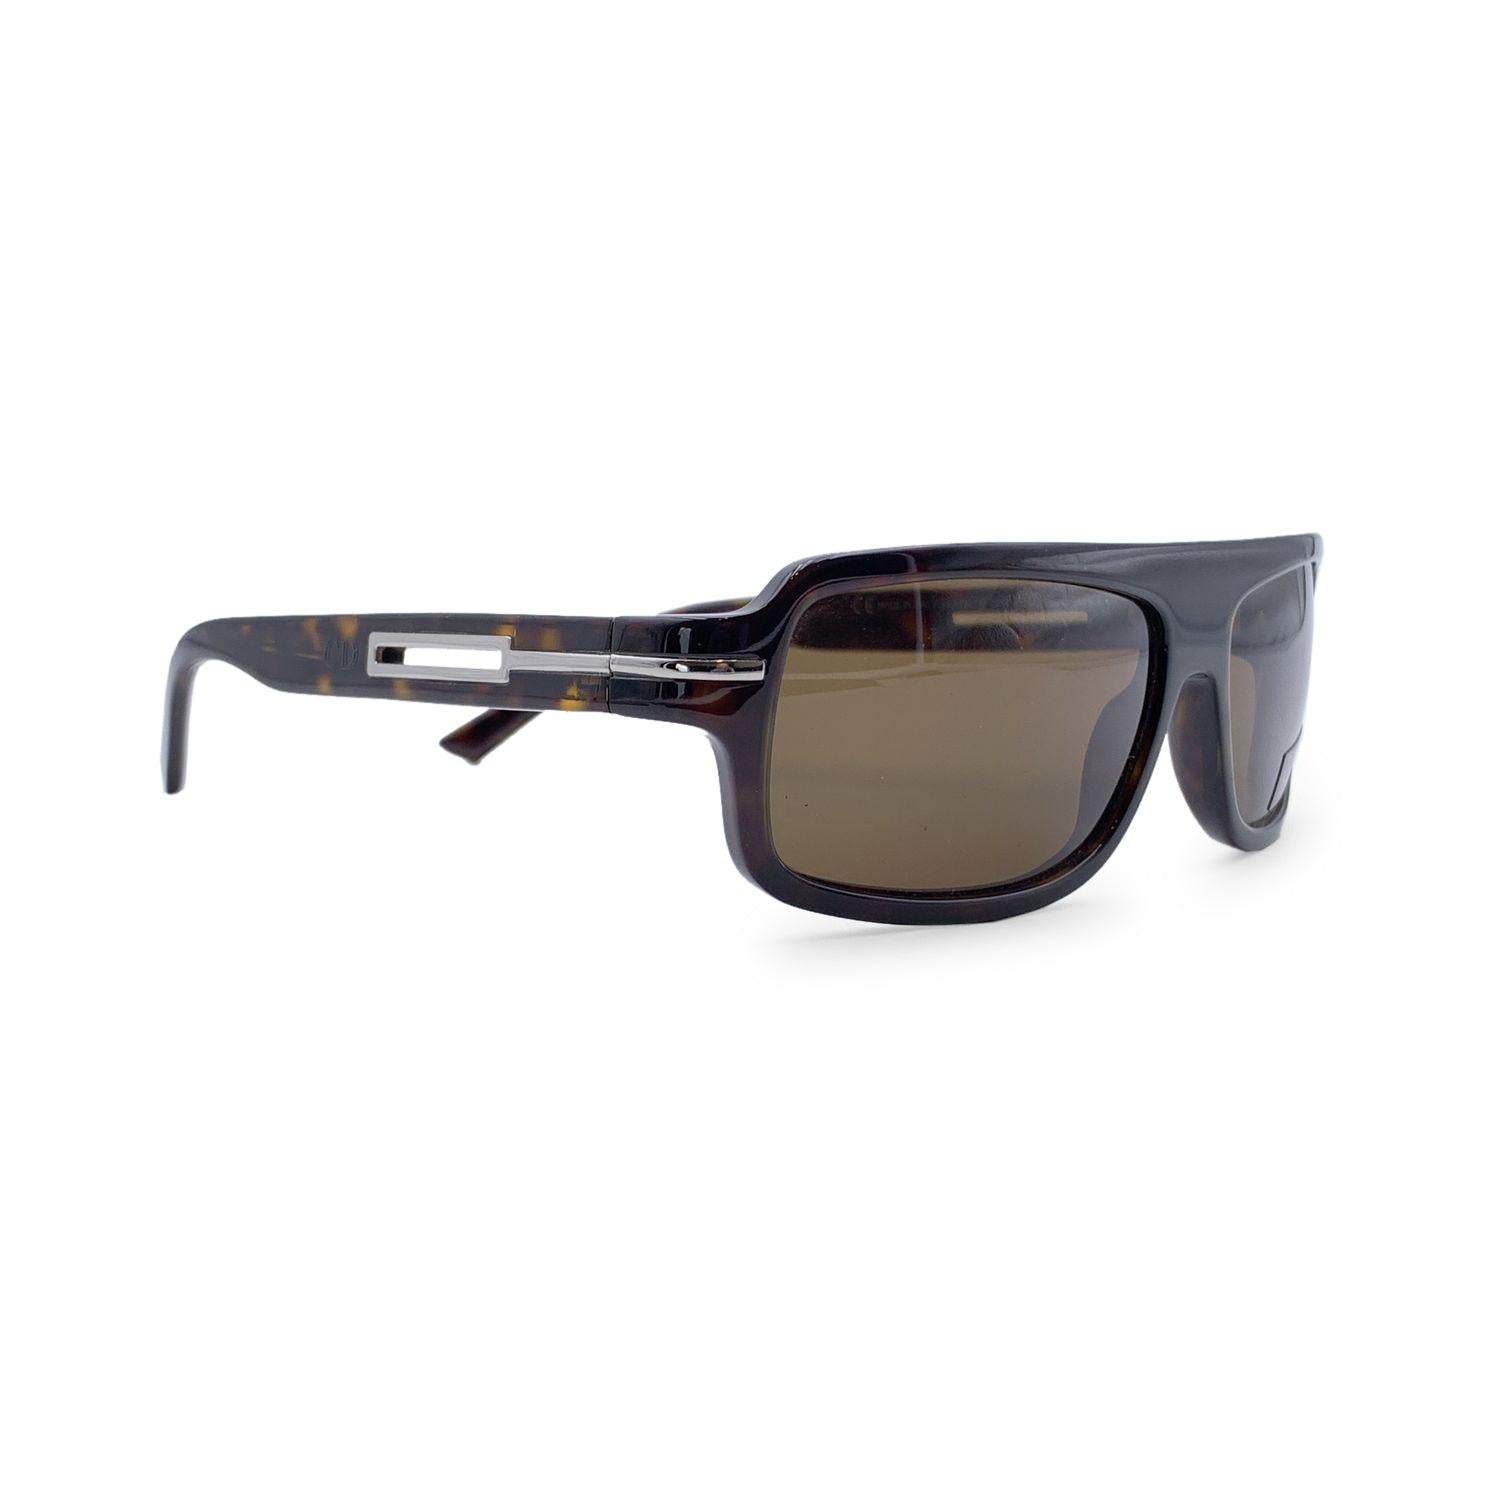 Dior Homme Black Black Tie 70/S Sunglasses 086EC 56/15 135mm In Excellent Condition For Sale In Rome, Rome